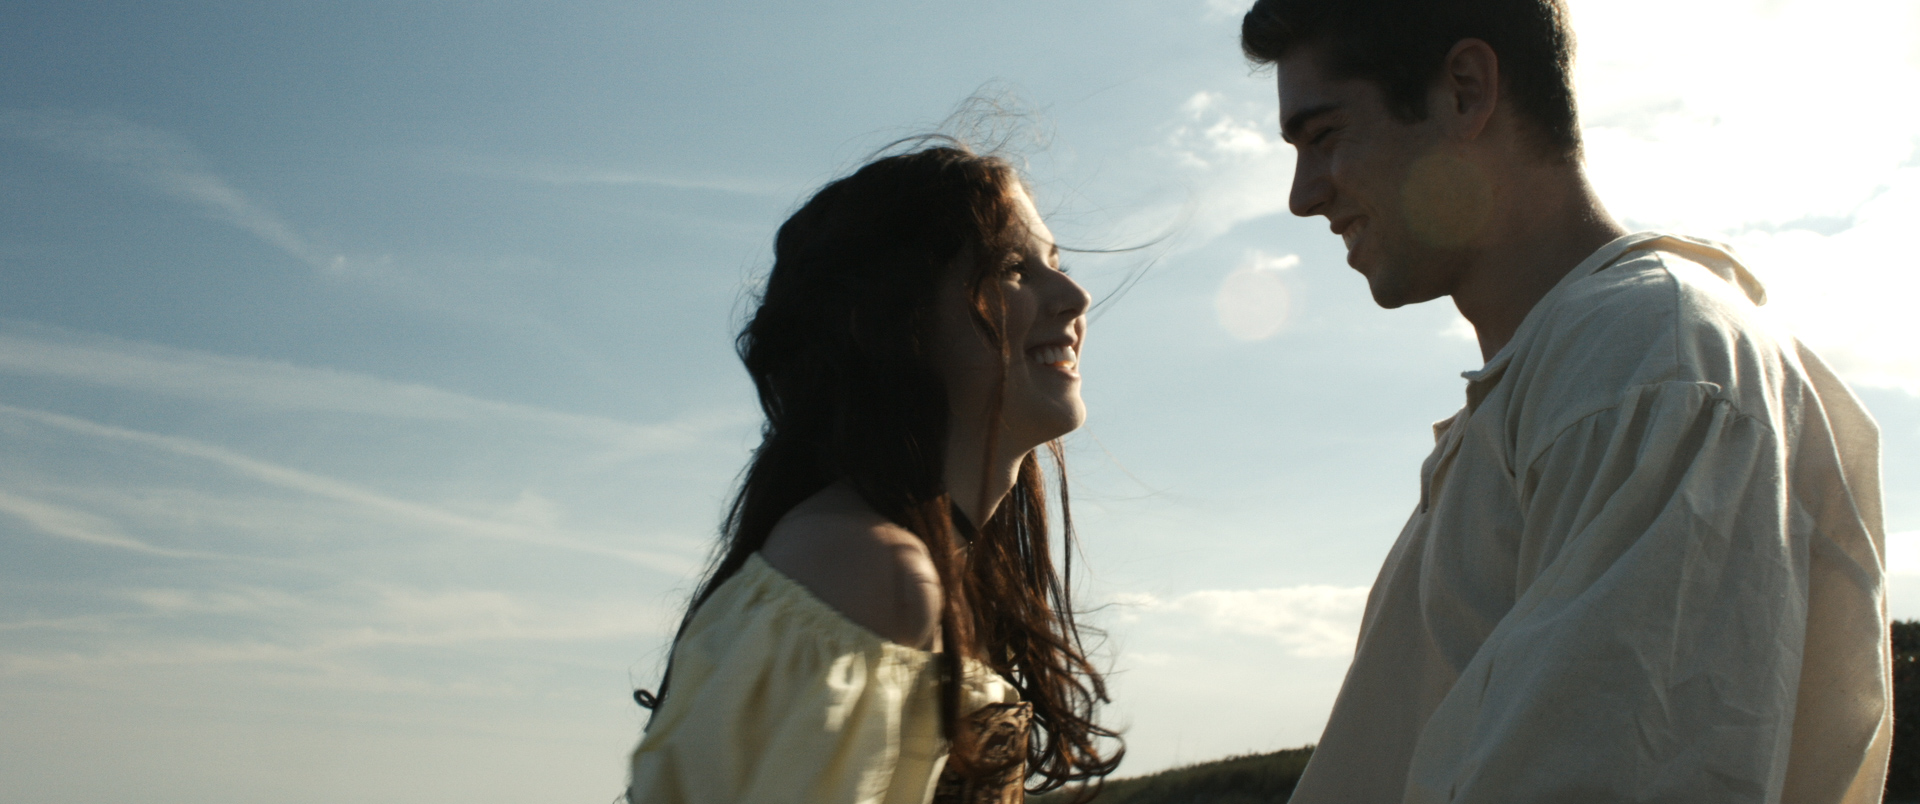 Sinclaire as Genevieve with Devin Merrick as Tristan, in 'Genevieve' 2015